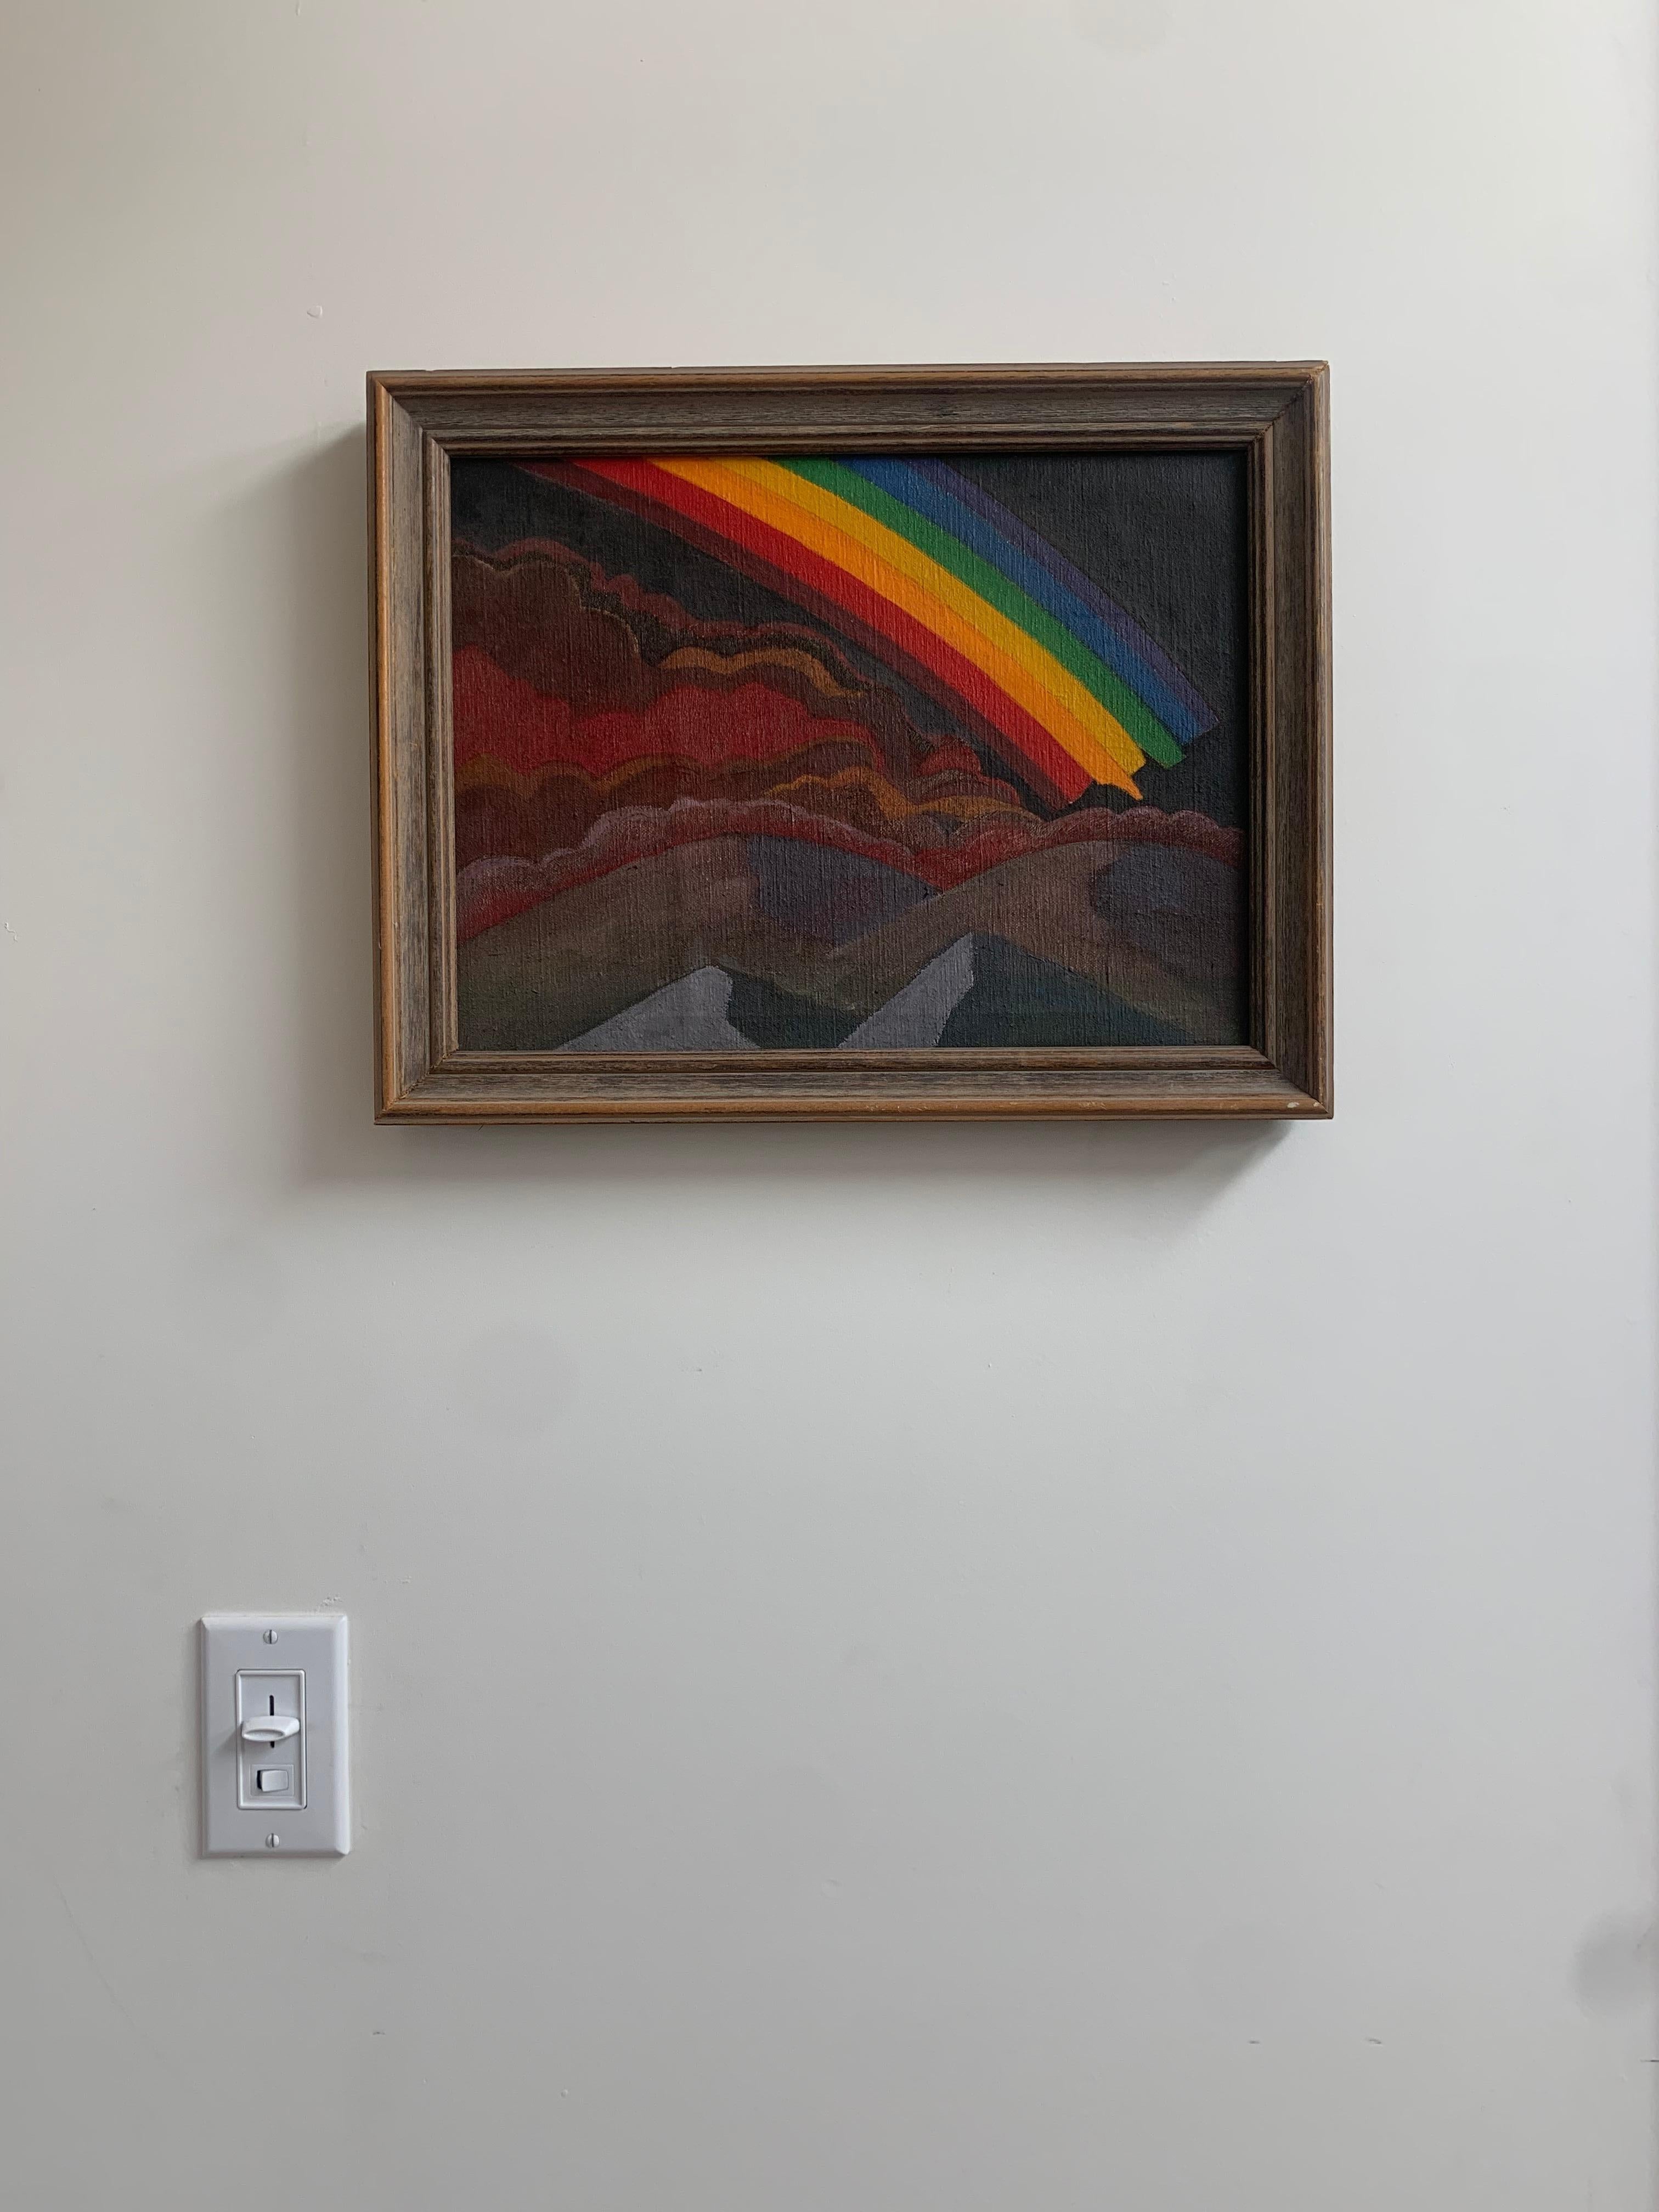 A painting - « Midnight Rainbow » - by Edward Beardsley, 1980, signed. Oil on canvas. This tableau features a tumultuous storm on the verge of being eclipsed by a brilliant rainbow. Strong in color and economical in texture, Beardsley’s œuvre